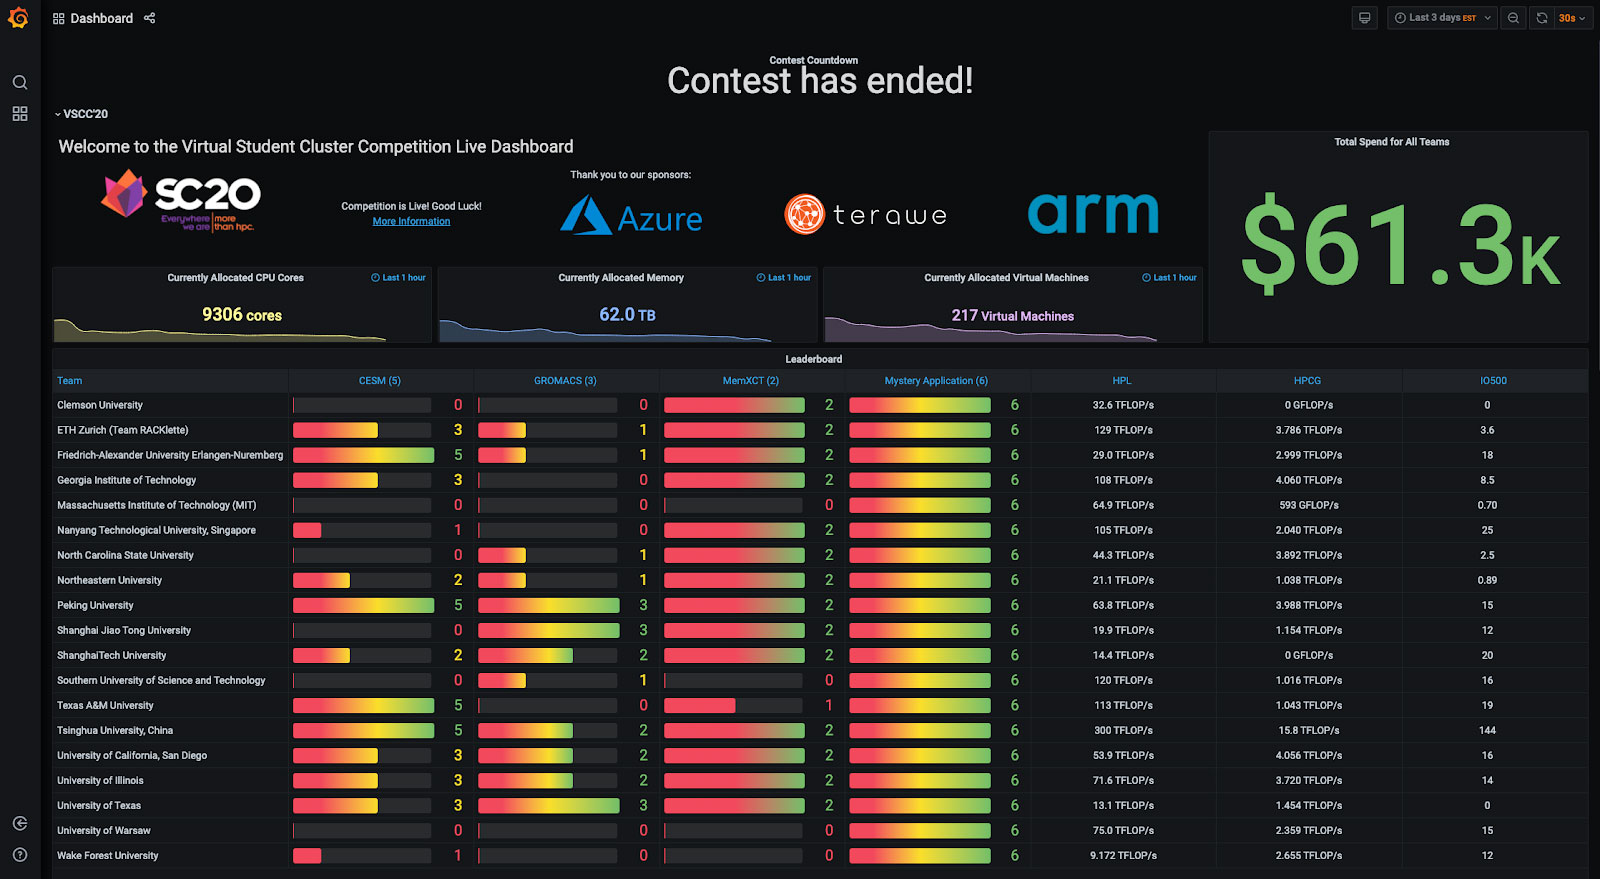 2020 Student Cluster Competition Azure Leaderboard